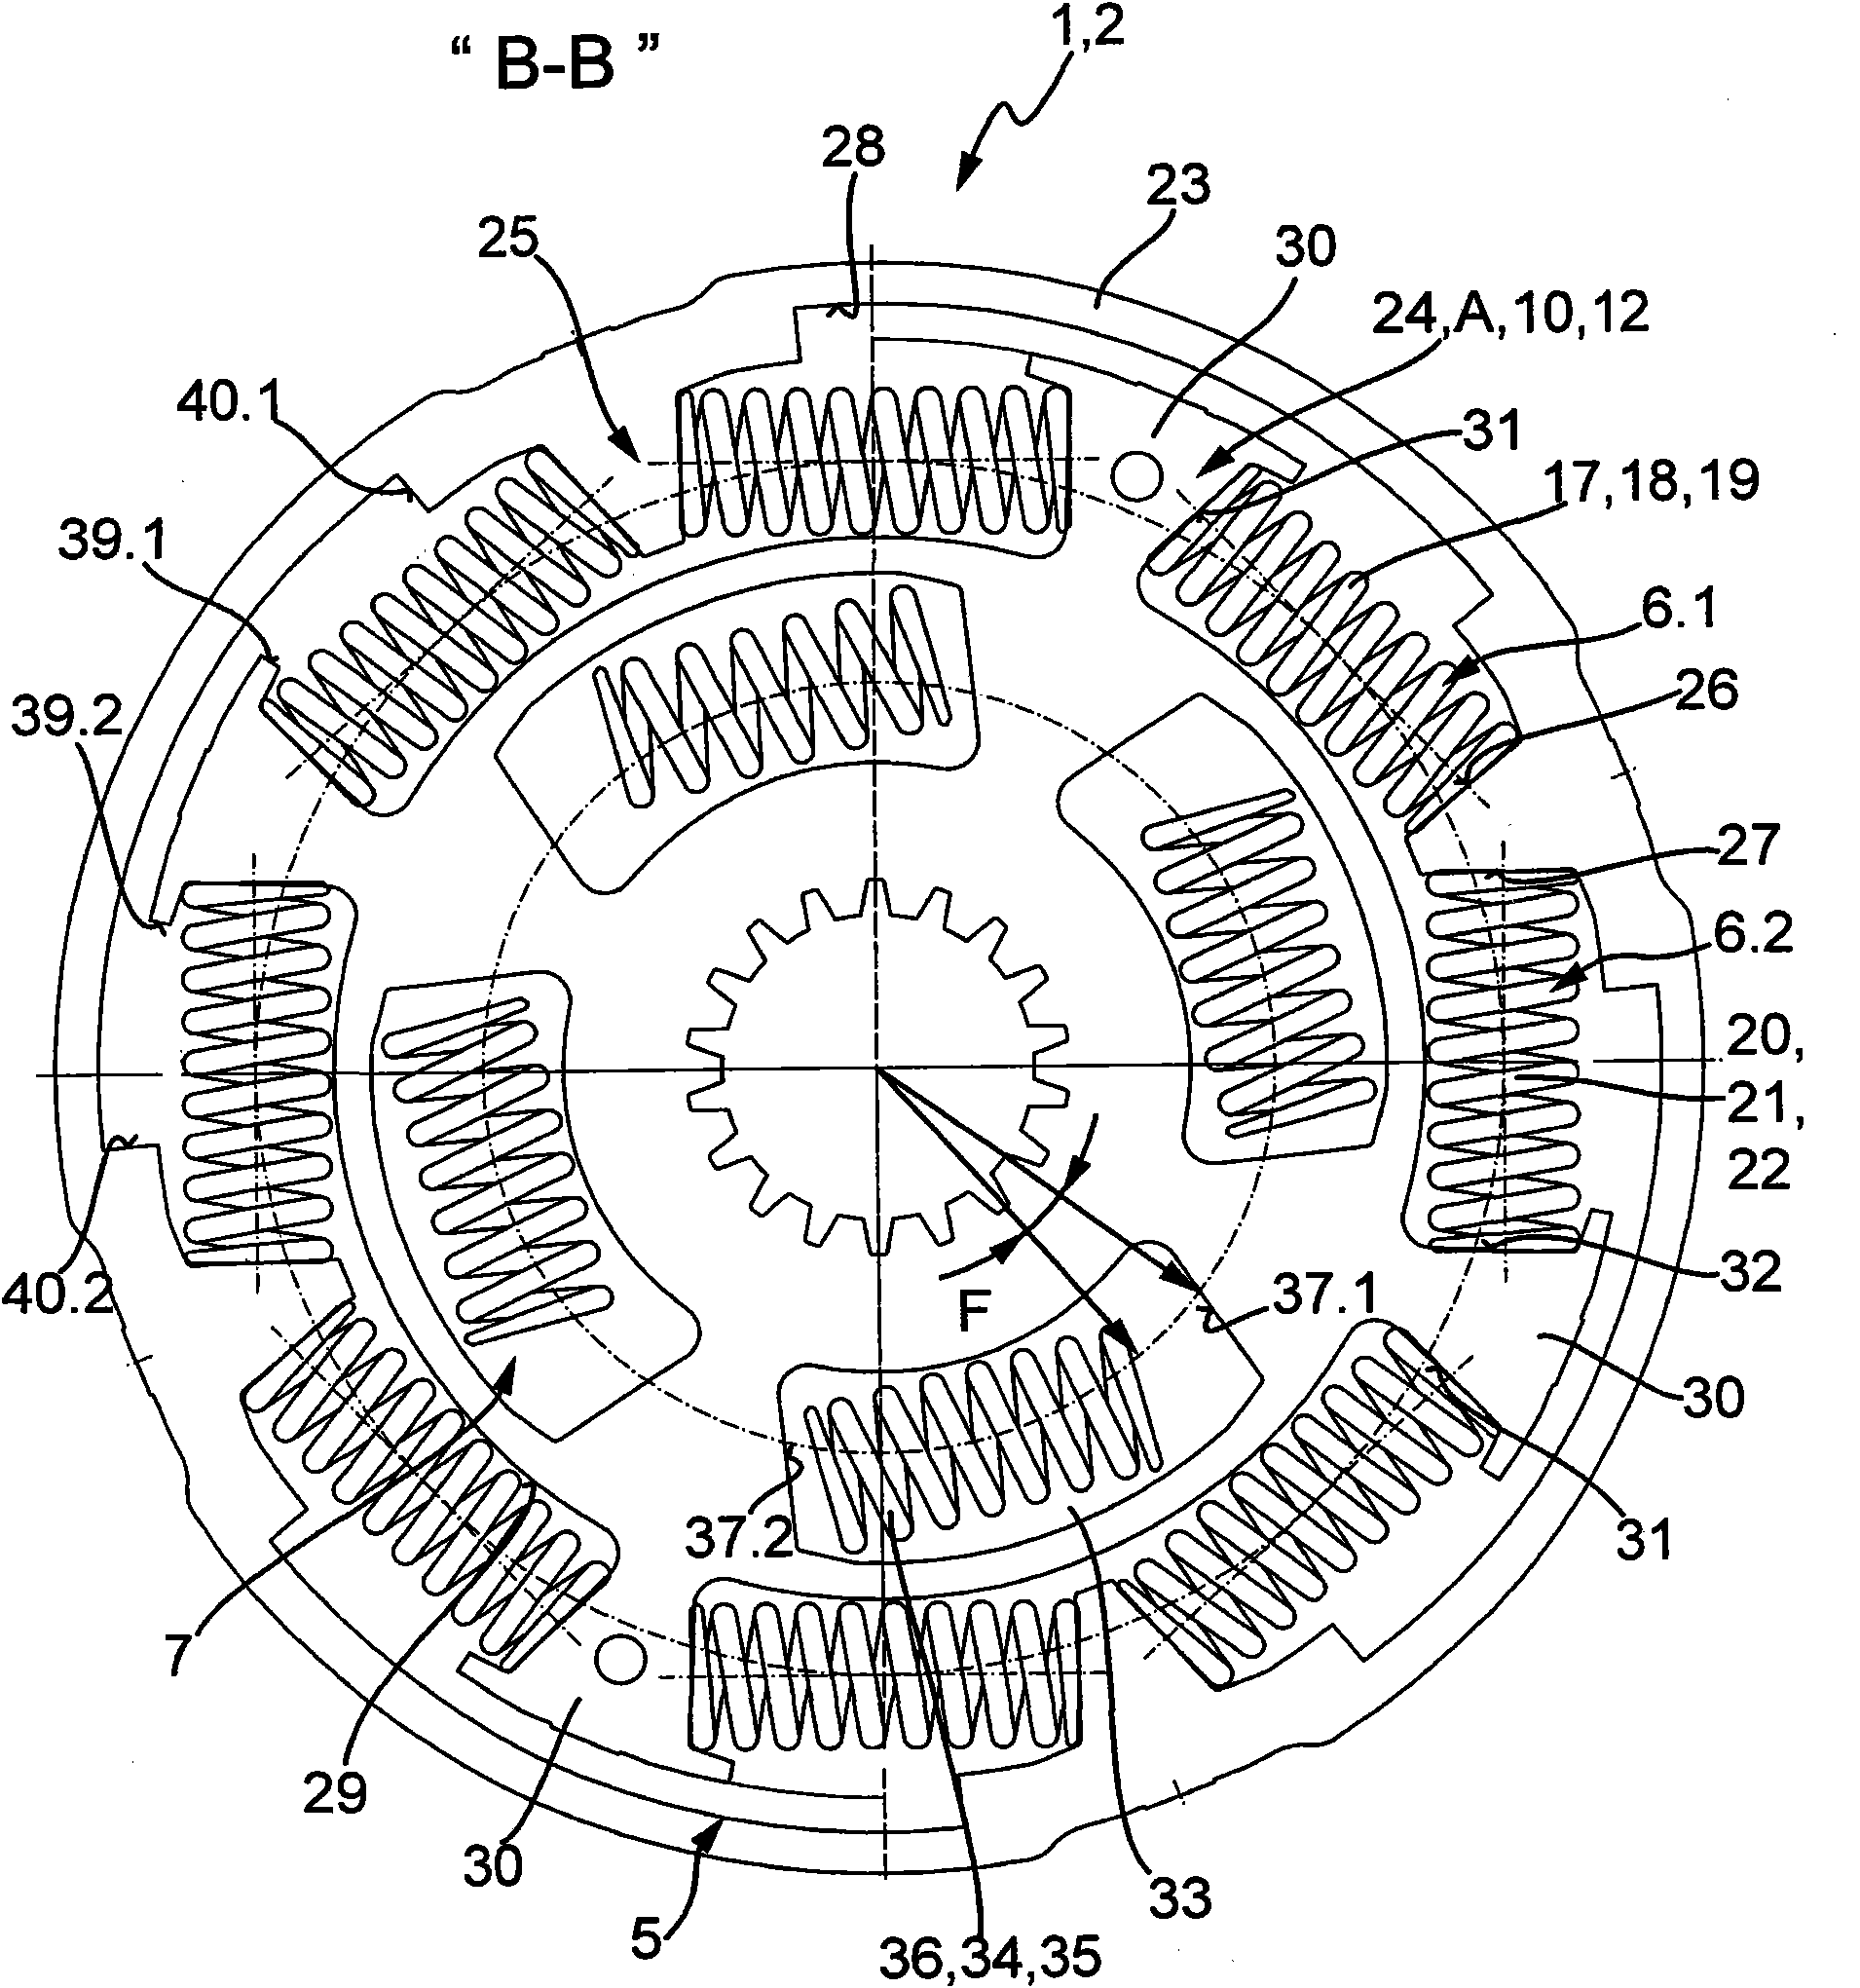 Device for damping vibrations, in particular a multi-step torsional vibration damper